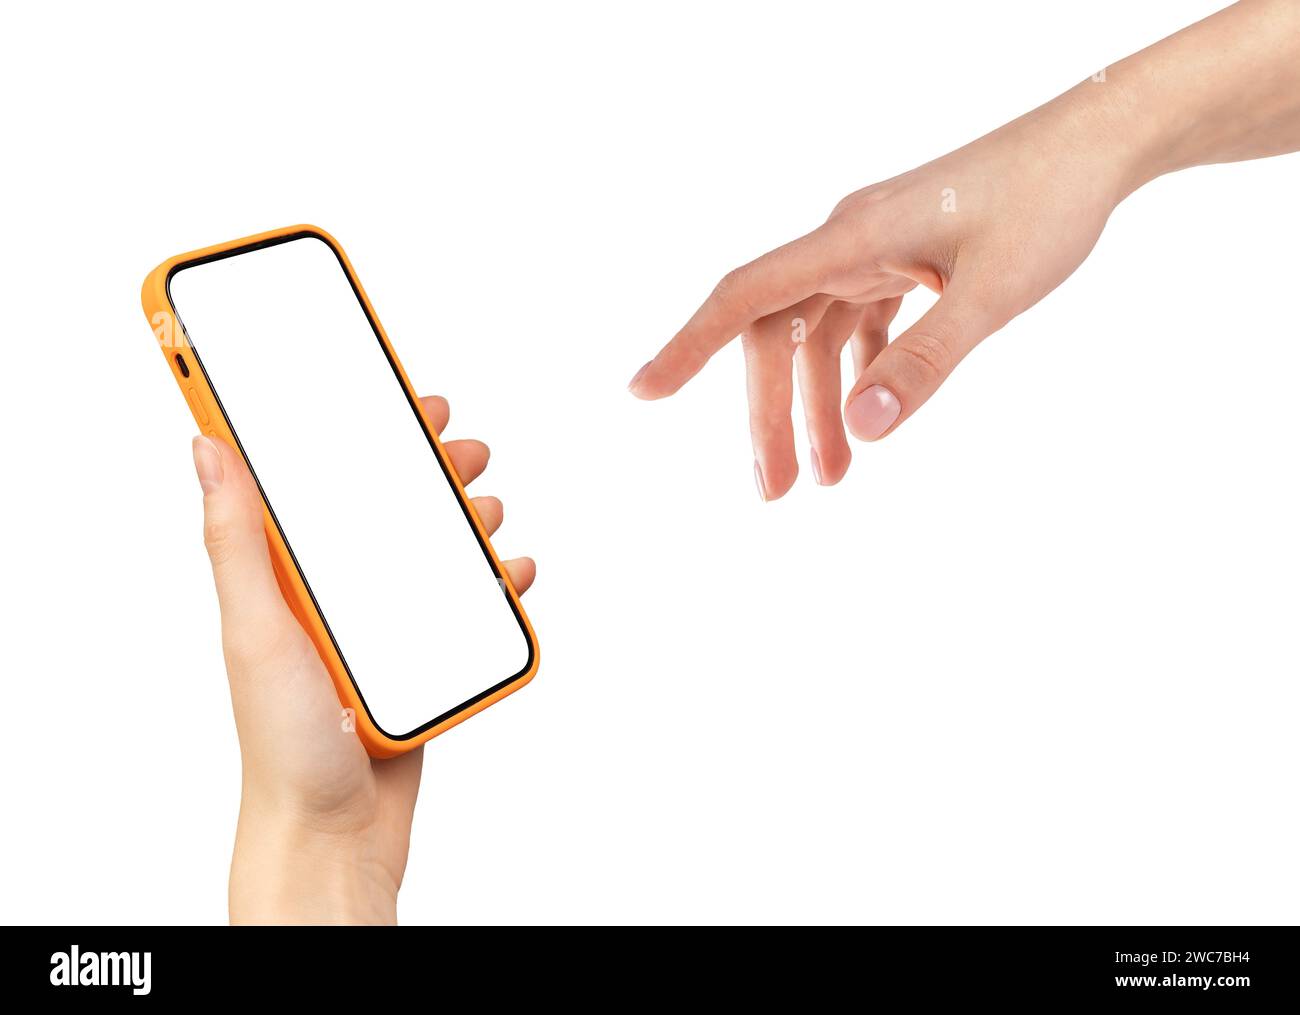 Finger reaching to tap mobile phone screen mockup. Smartphone display mock up in hand, advertising app, isolated on white Stock Photo